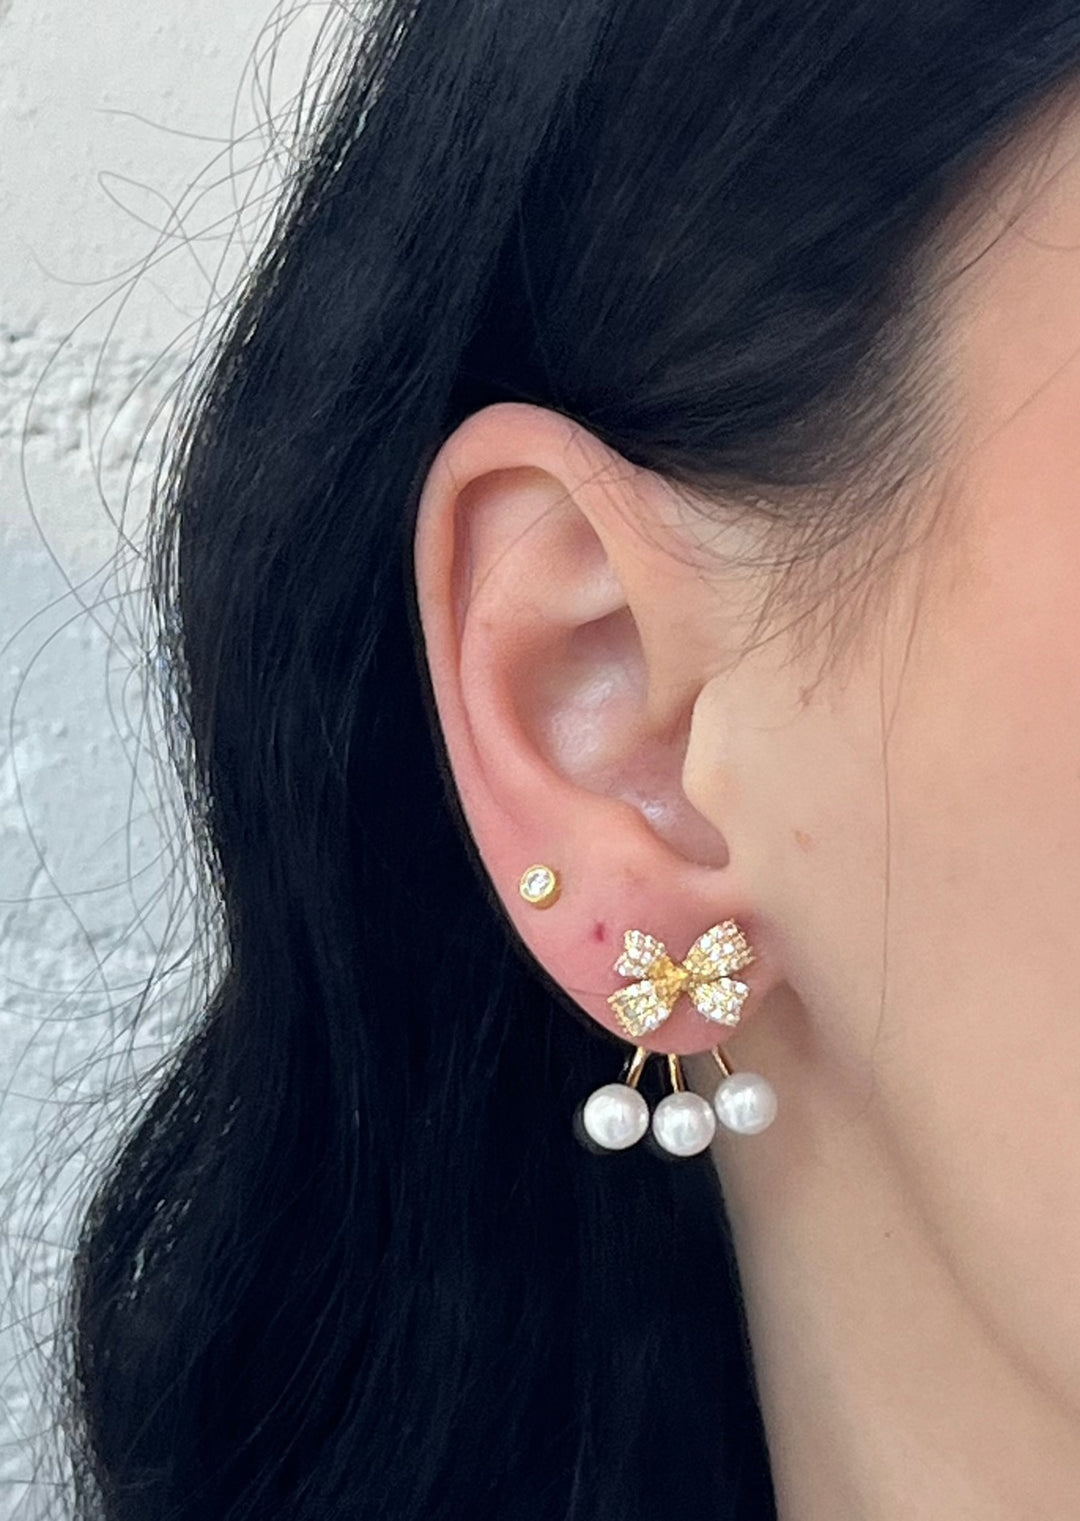 Gold Dipped Bow and Pearl Earrings, Jewelry, Adeline, Adeline, dallas boutique, dallas texas, texas boutique, women's boutique dallas, adeline boutique, dallas boutique, trendy boutique, affordable boutique